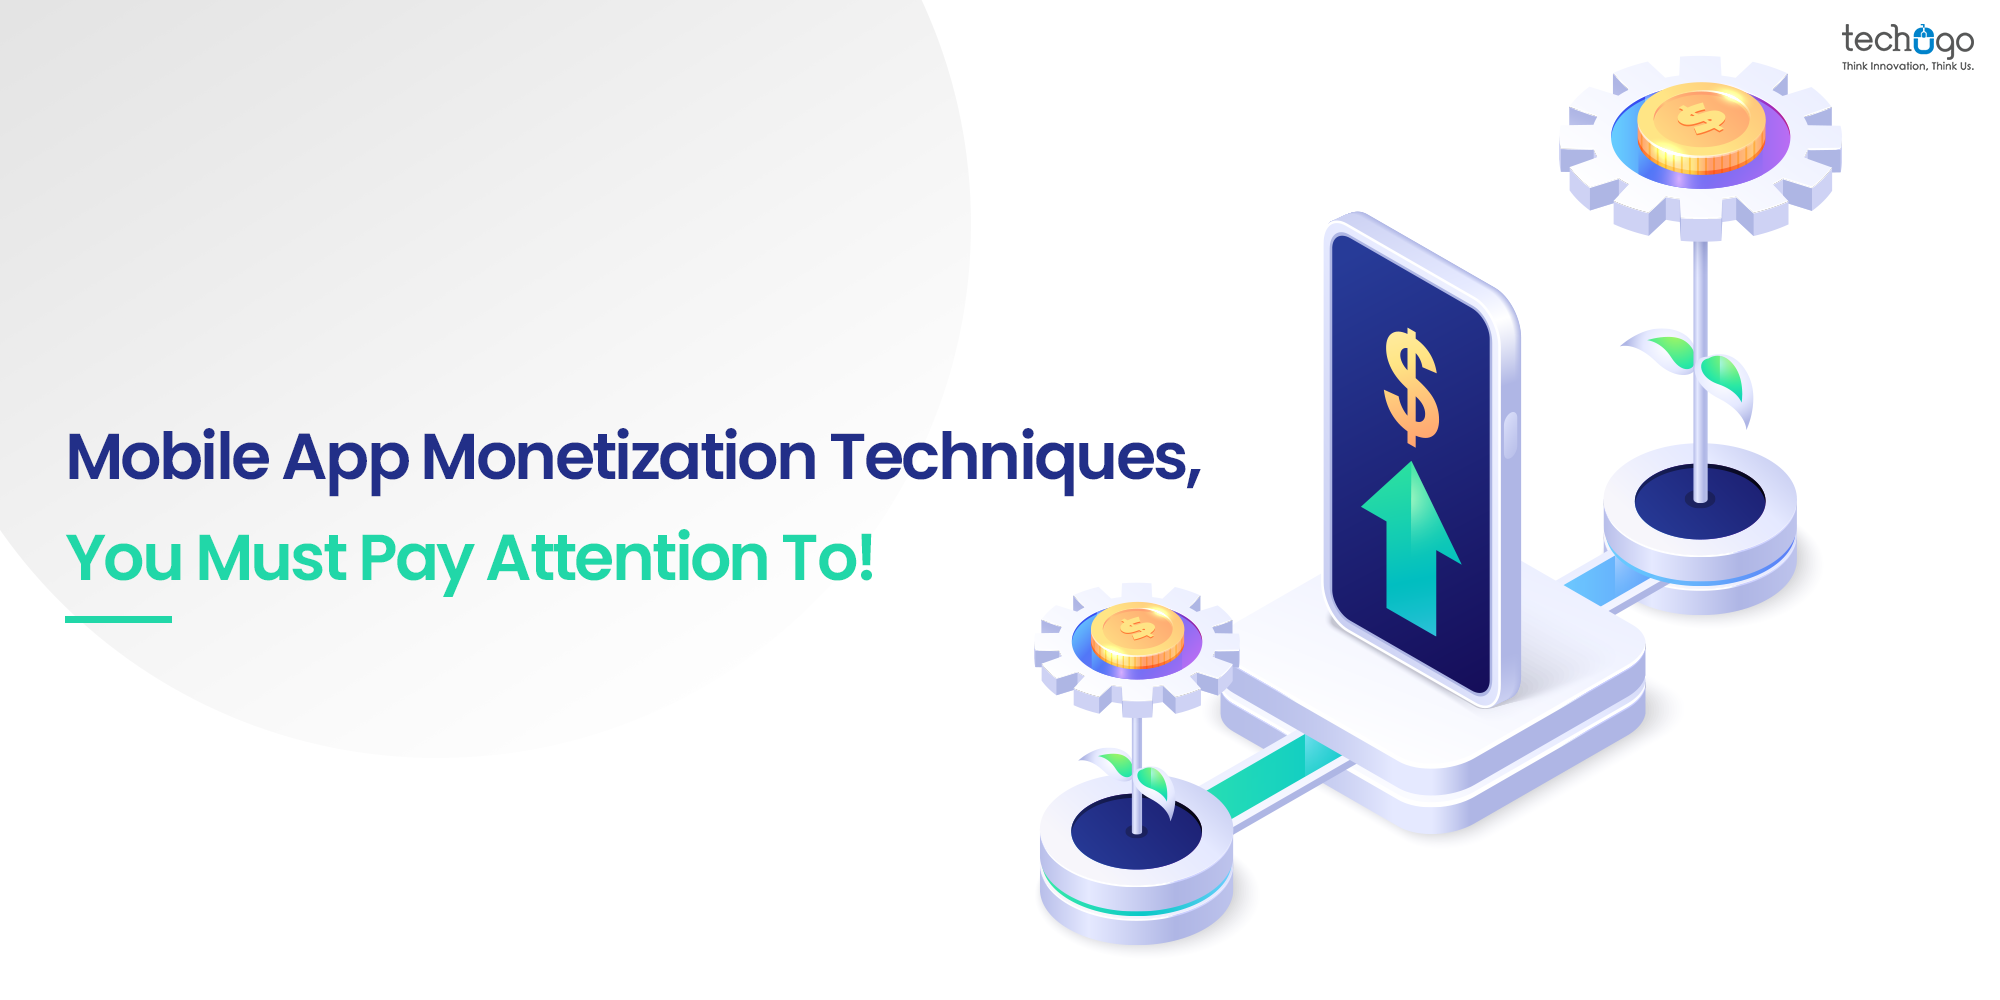 MOBILE APP MONETIZATION TECHNIQUES, YOU MUST PAY ATTENTION TO!